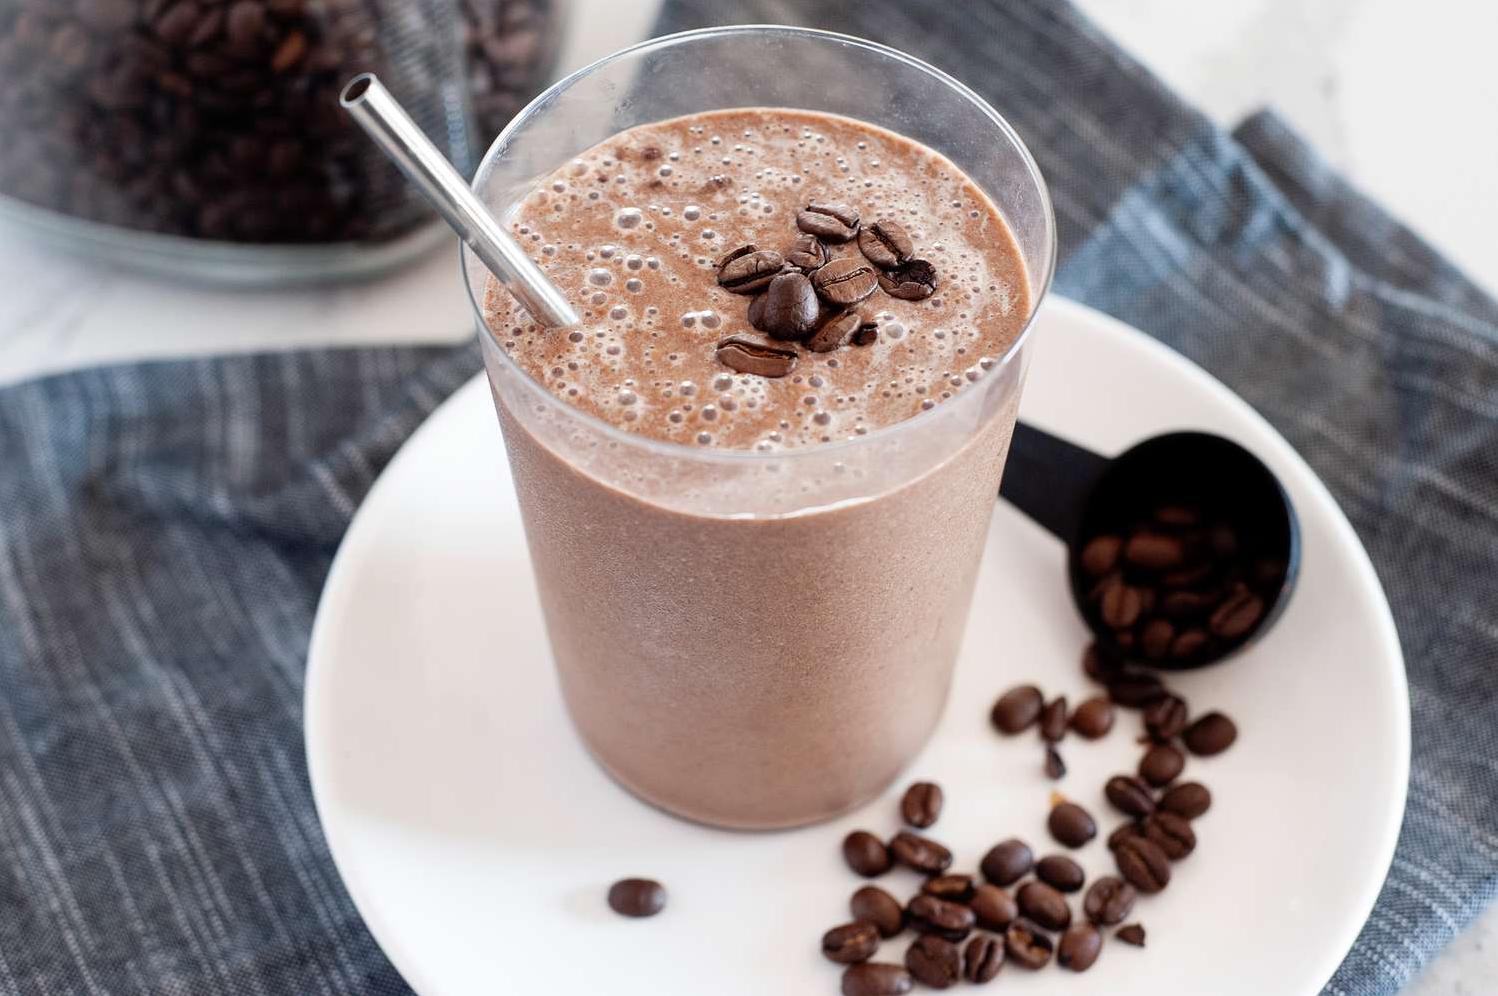  Give your taste buds a wake-up call with this rich and creamy smoothie.